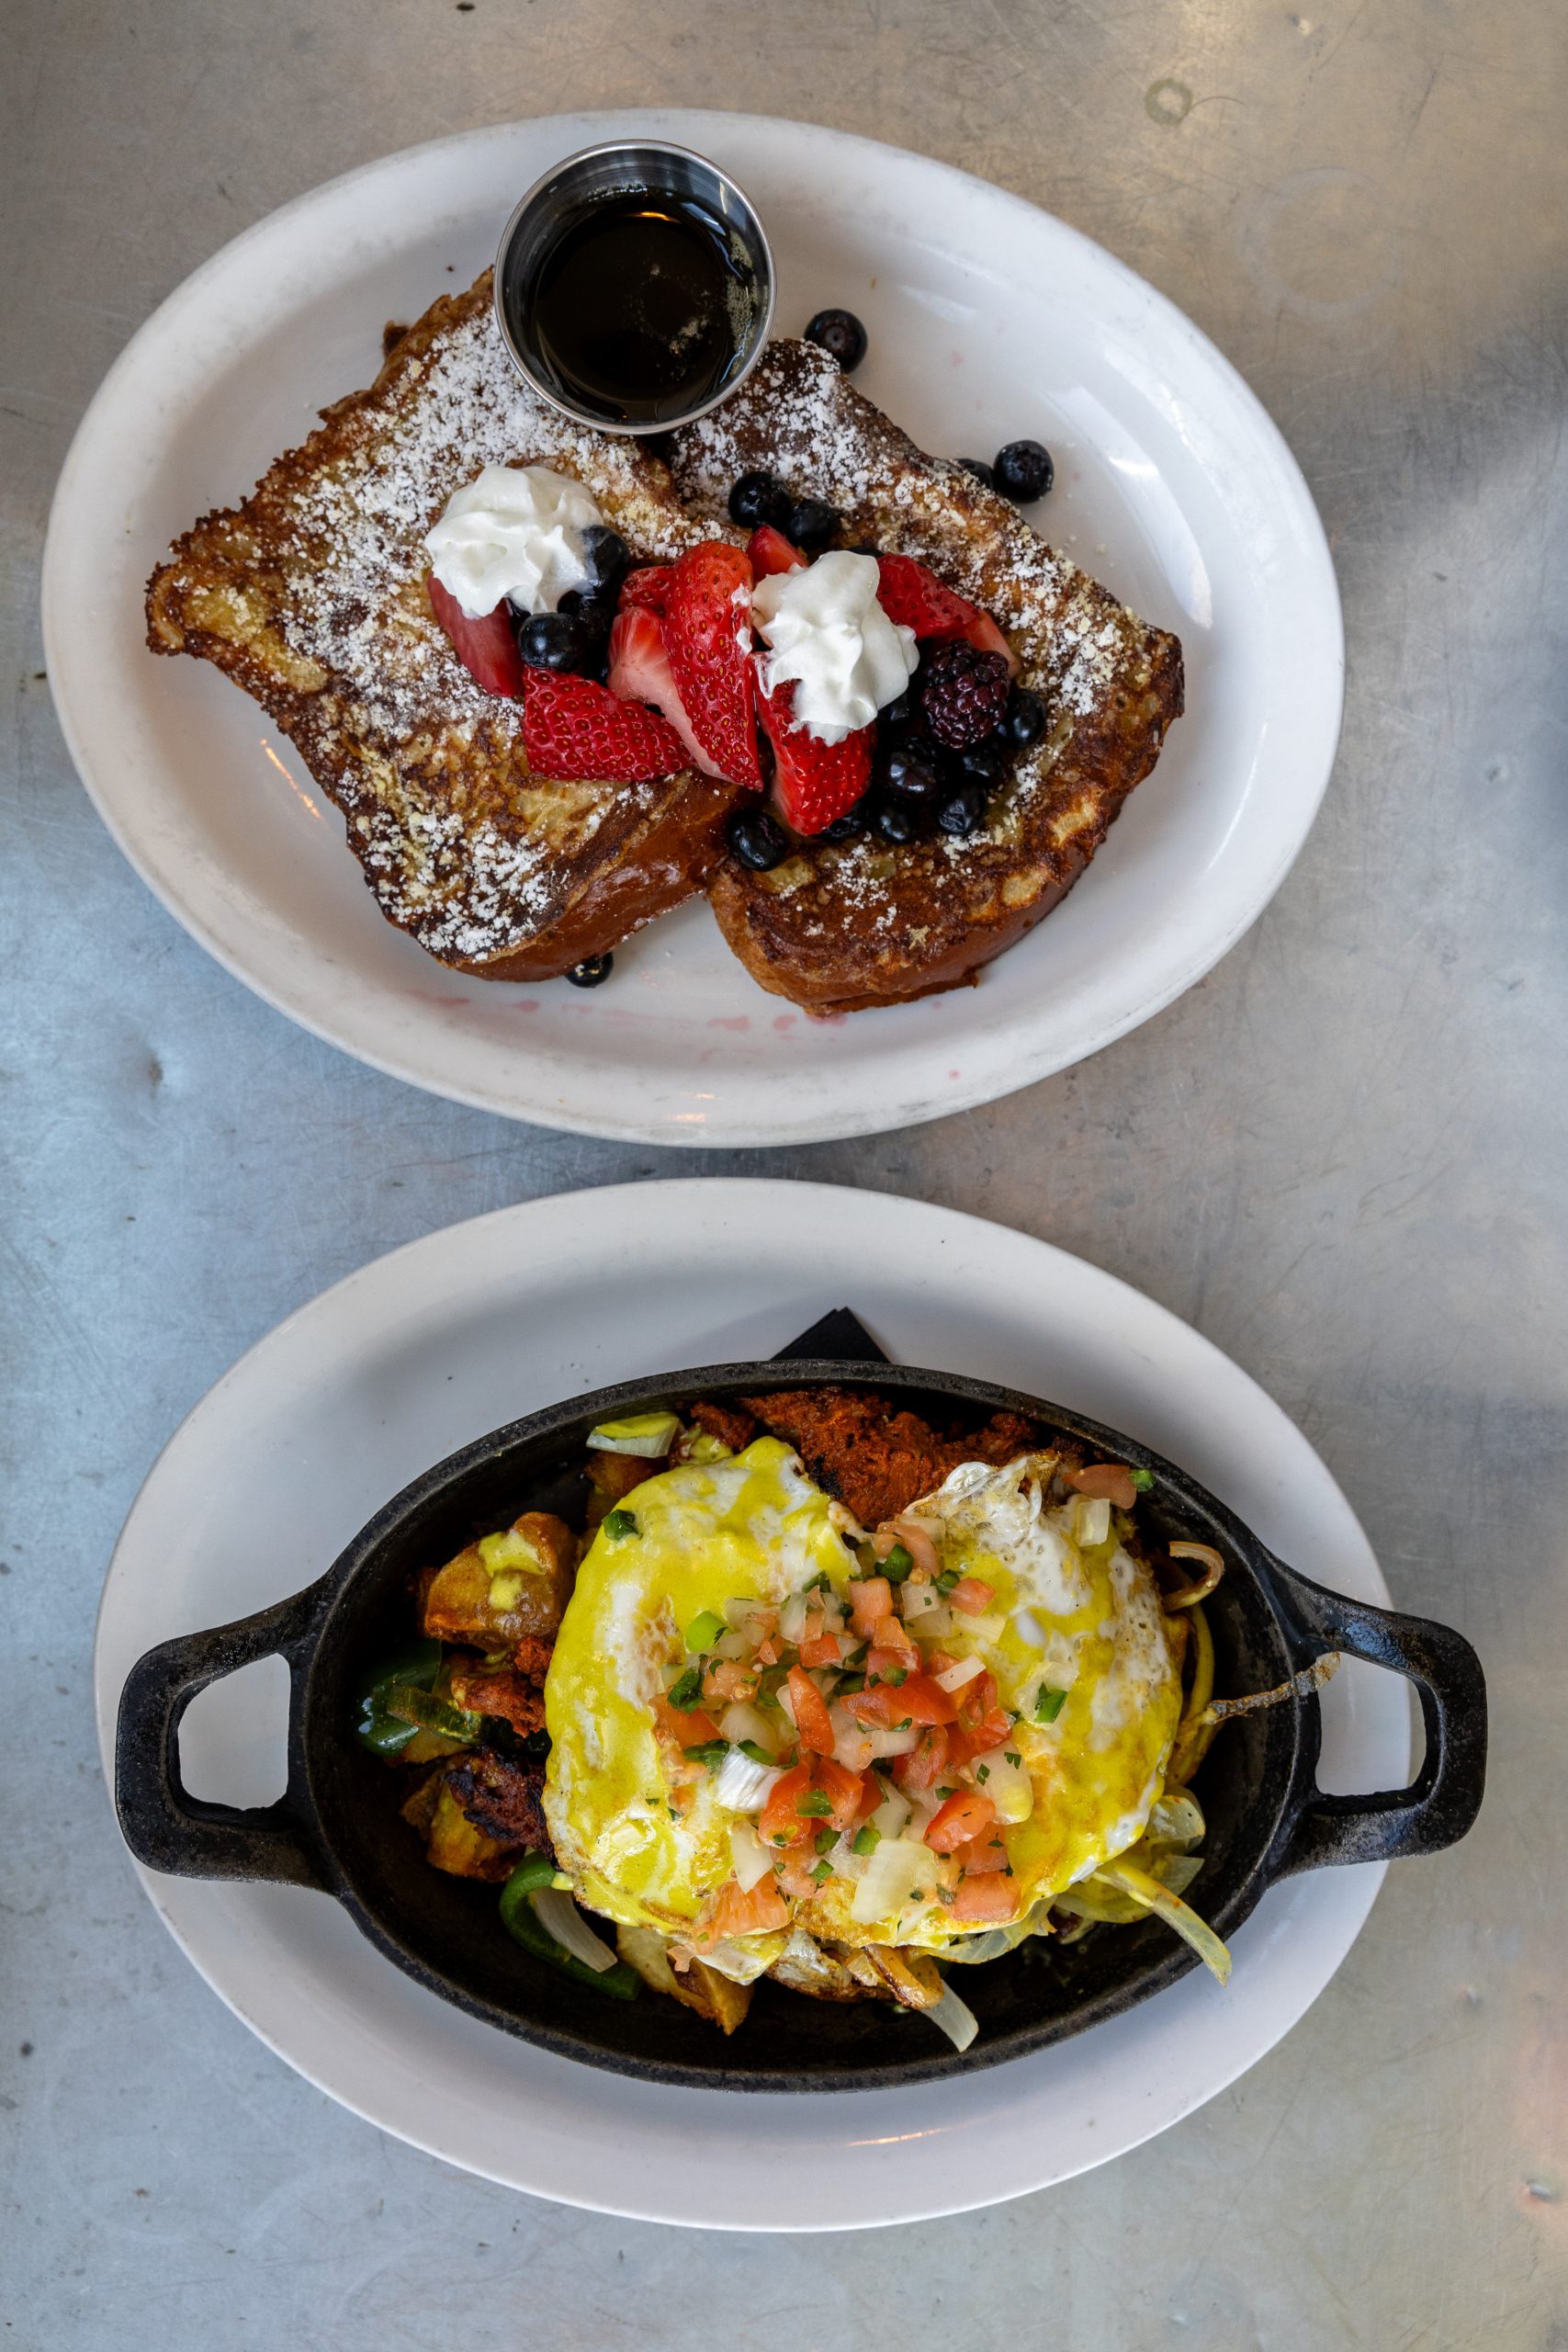 french toast and steak & egg skillet from tourist home cafe in flagstaff arizona